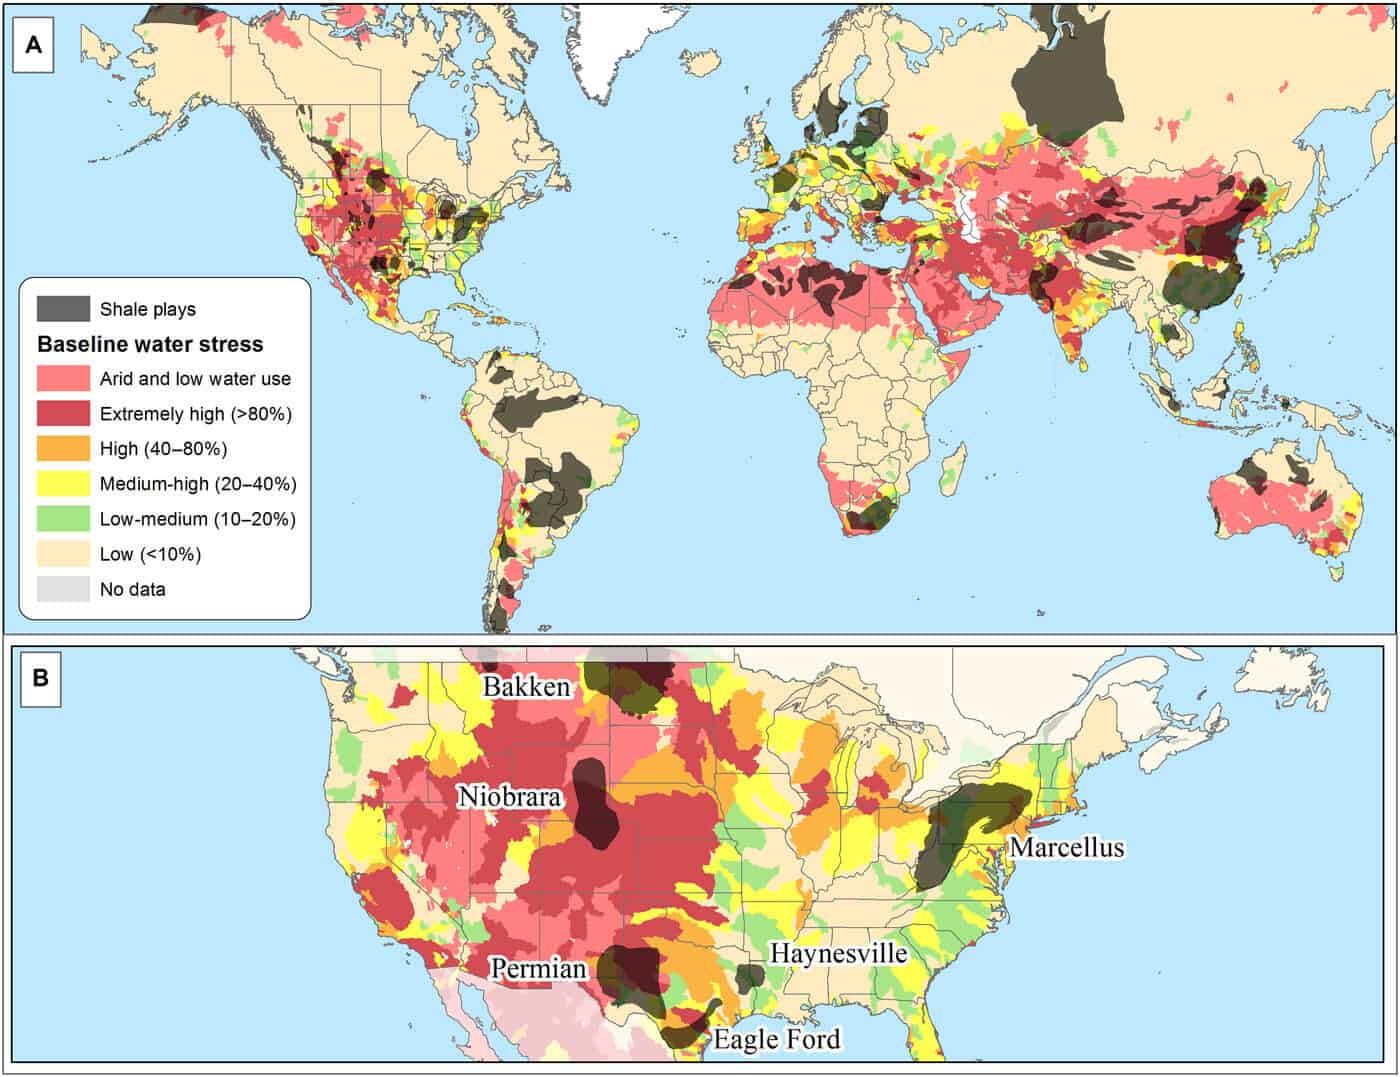 Map of water stress and shale plays; hydraulic fracturing